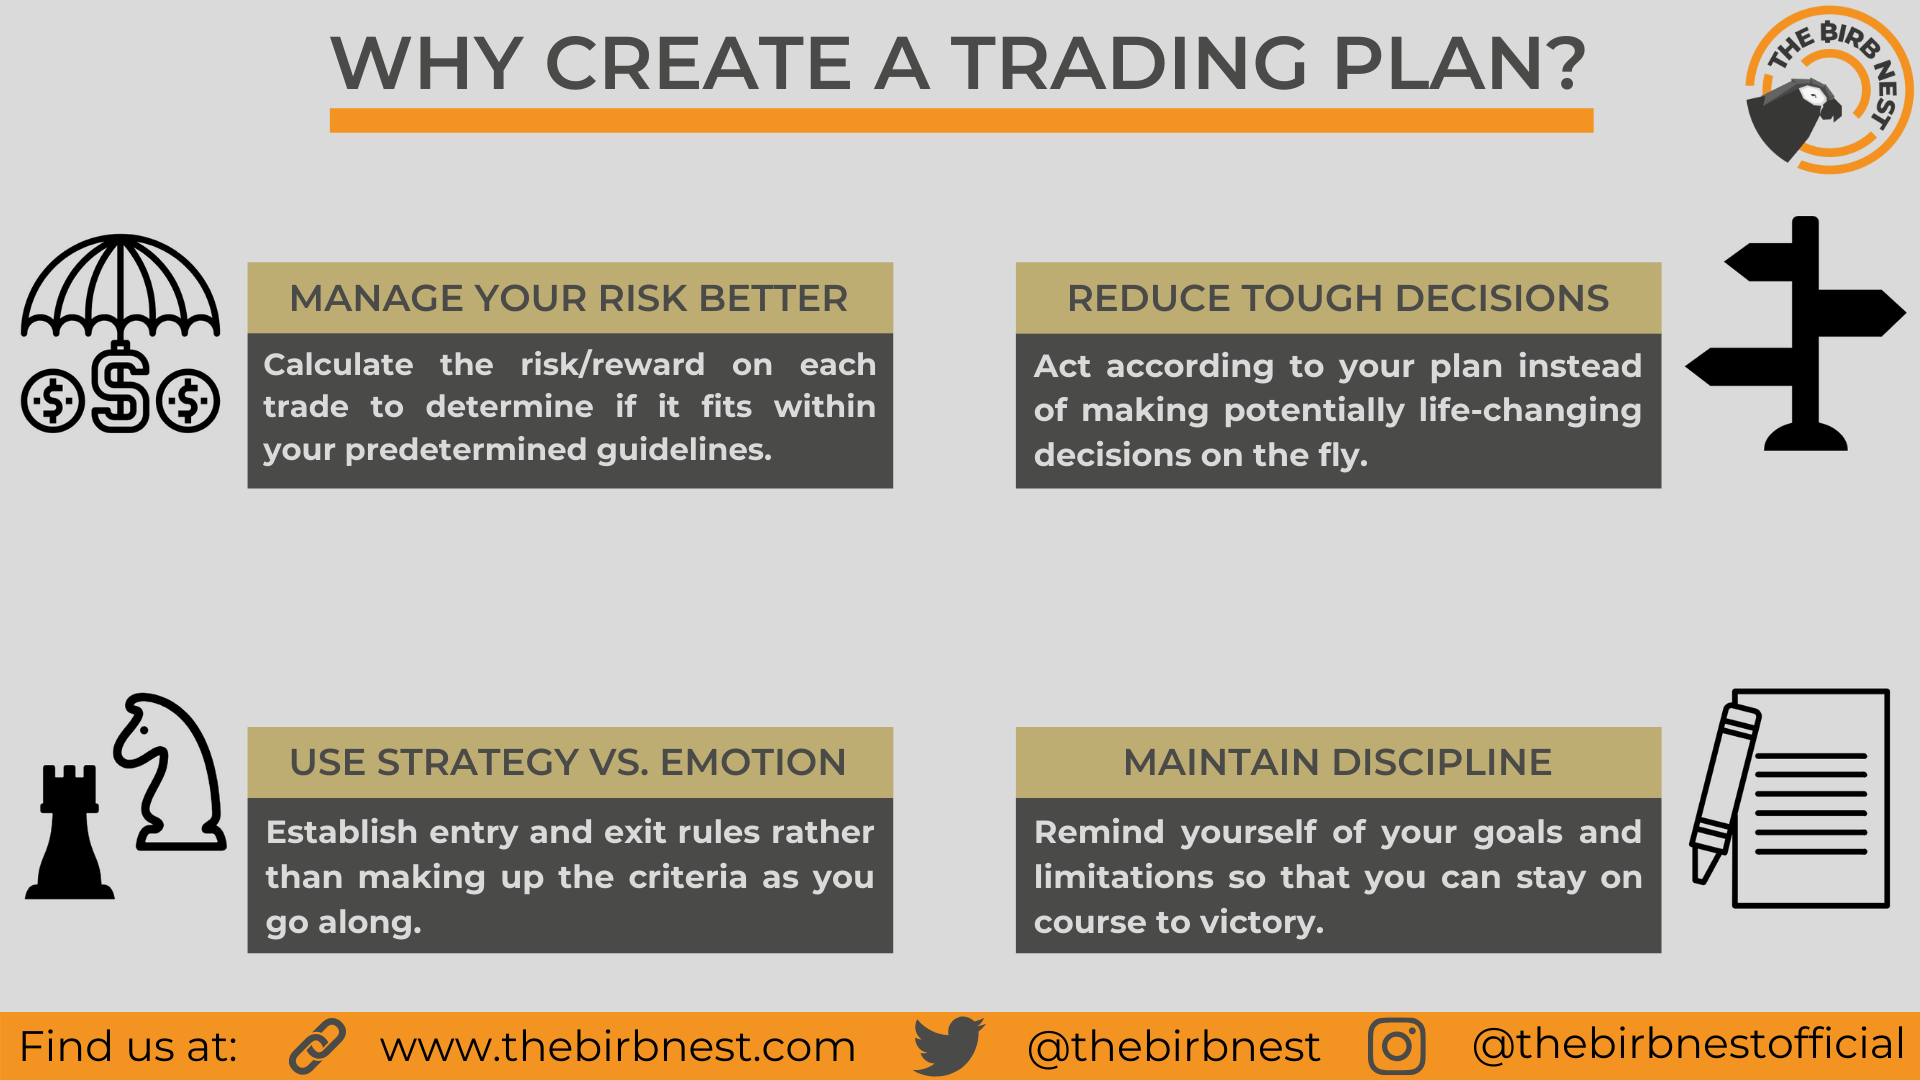 WHY-CREATE-A-TRADING-PLAN_